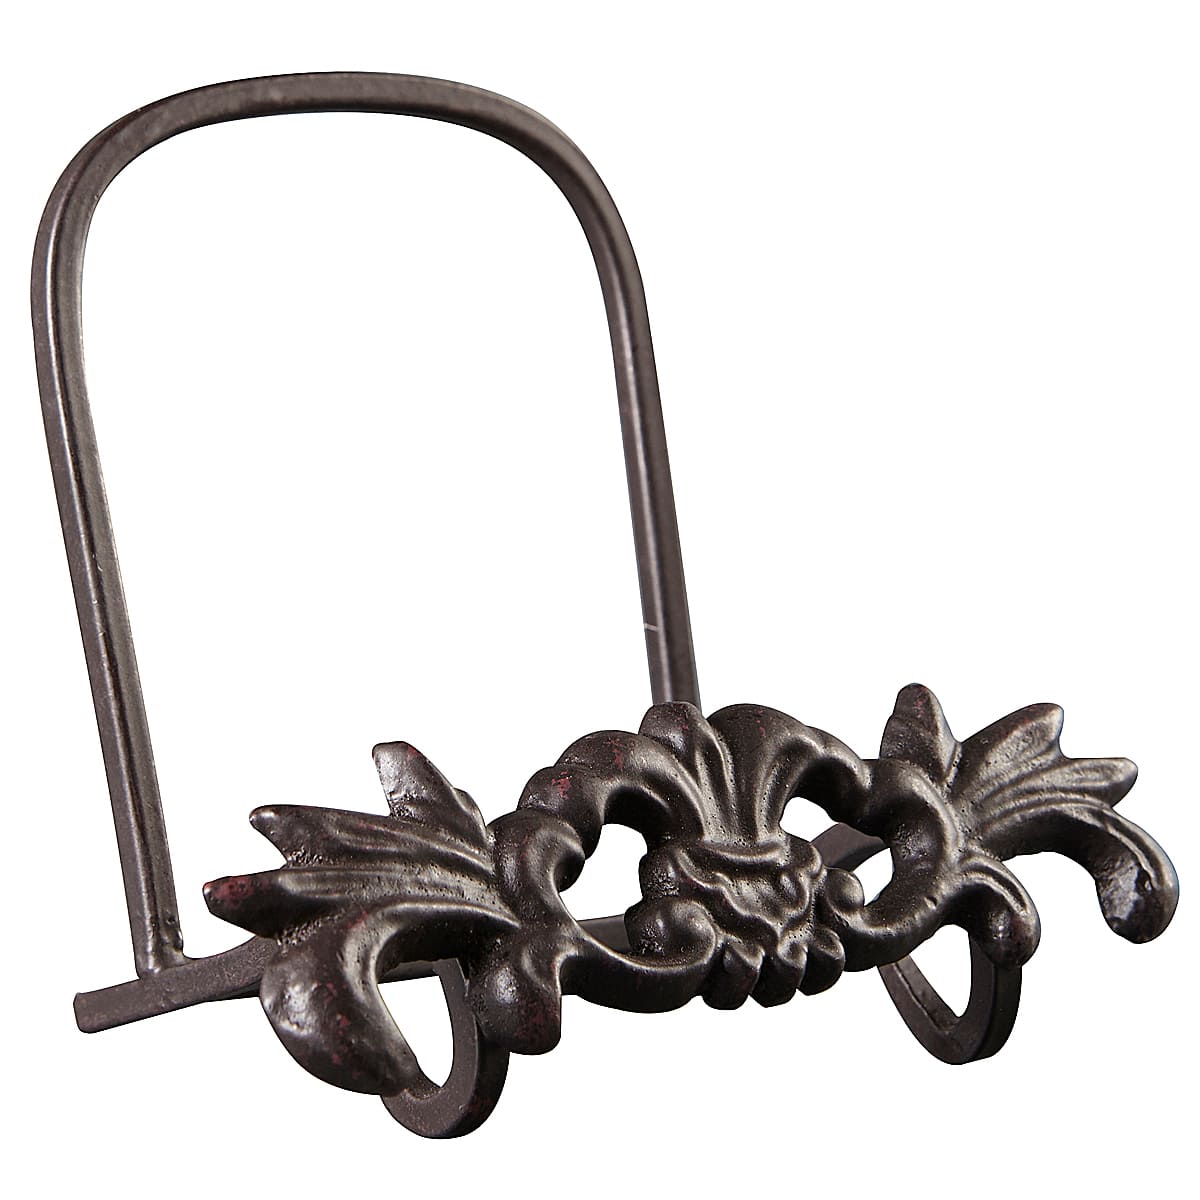 Free Shipping New 1 X Cast Iron Metal Motif Plate Art Holder Stand Display 